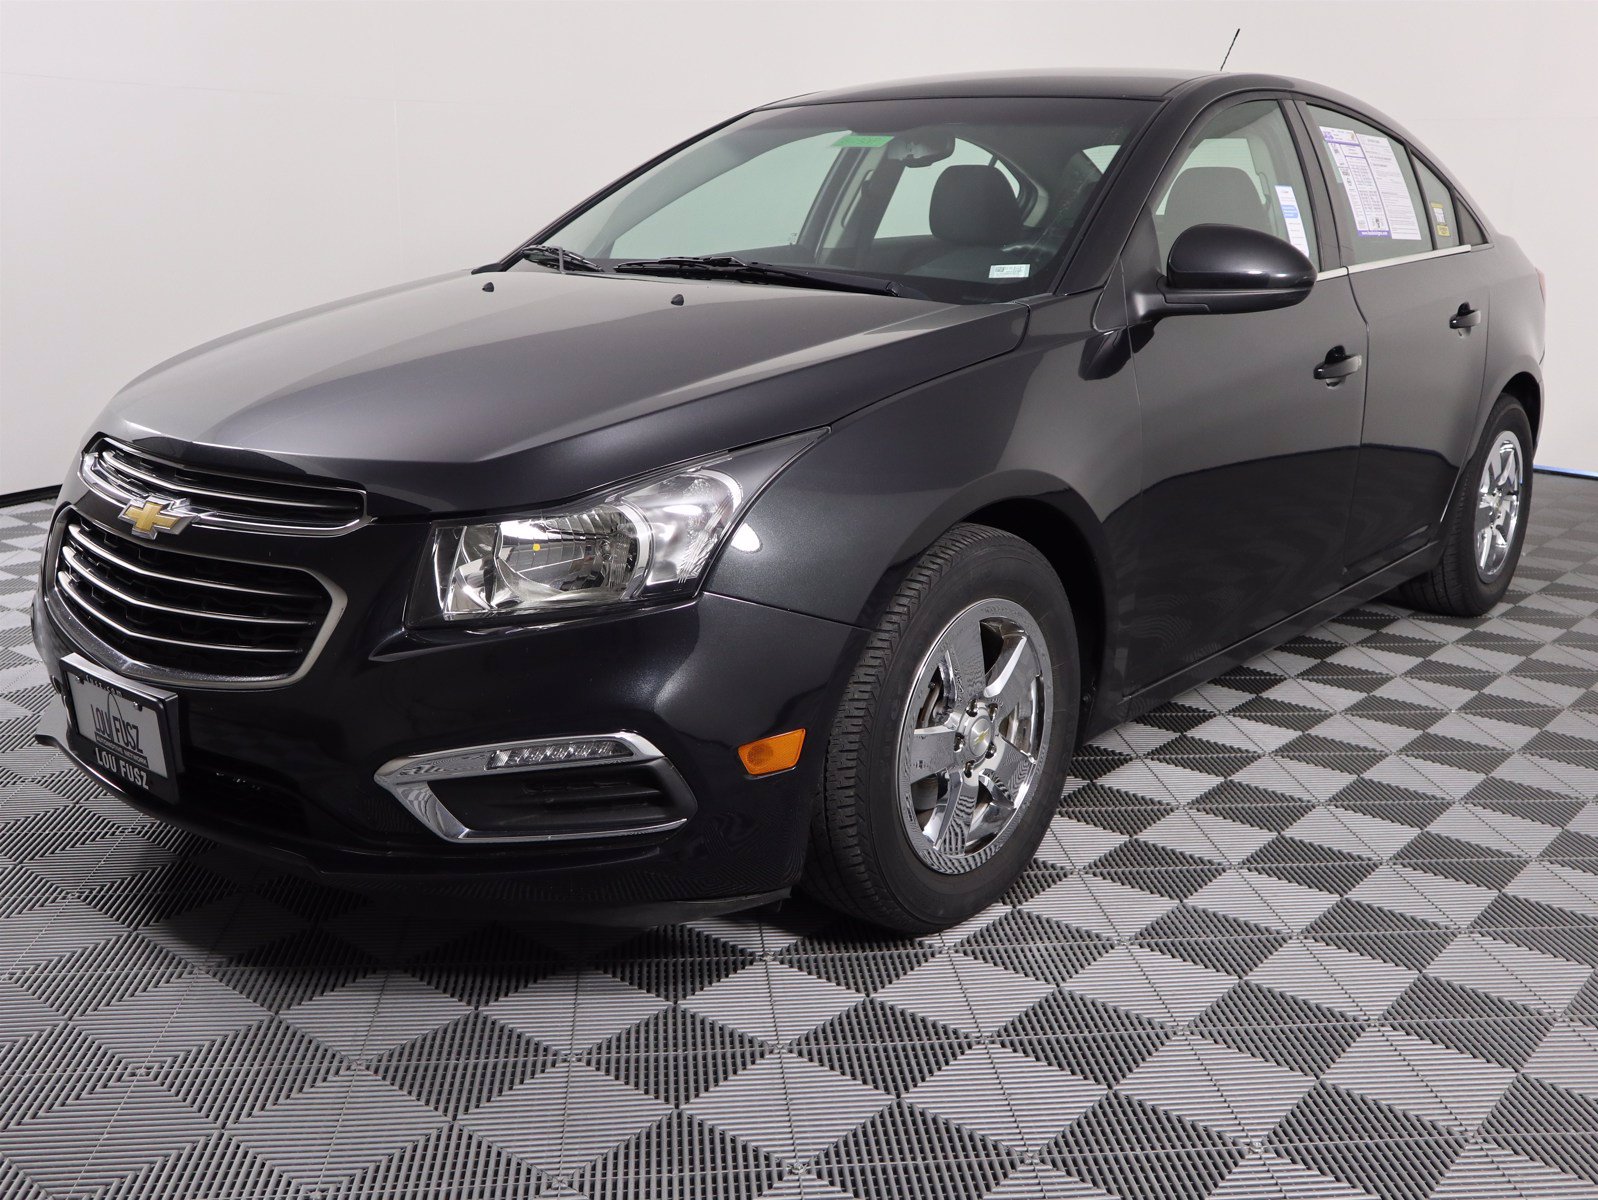 PreOwned 2016 Chevrolet Cruze Limited LT FWD 4dr Car